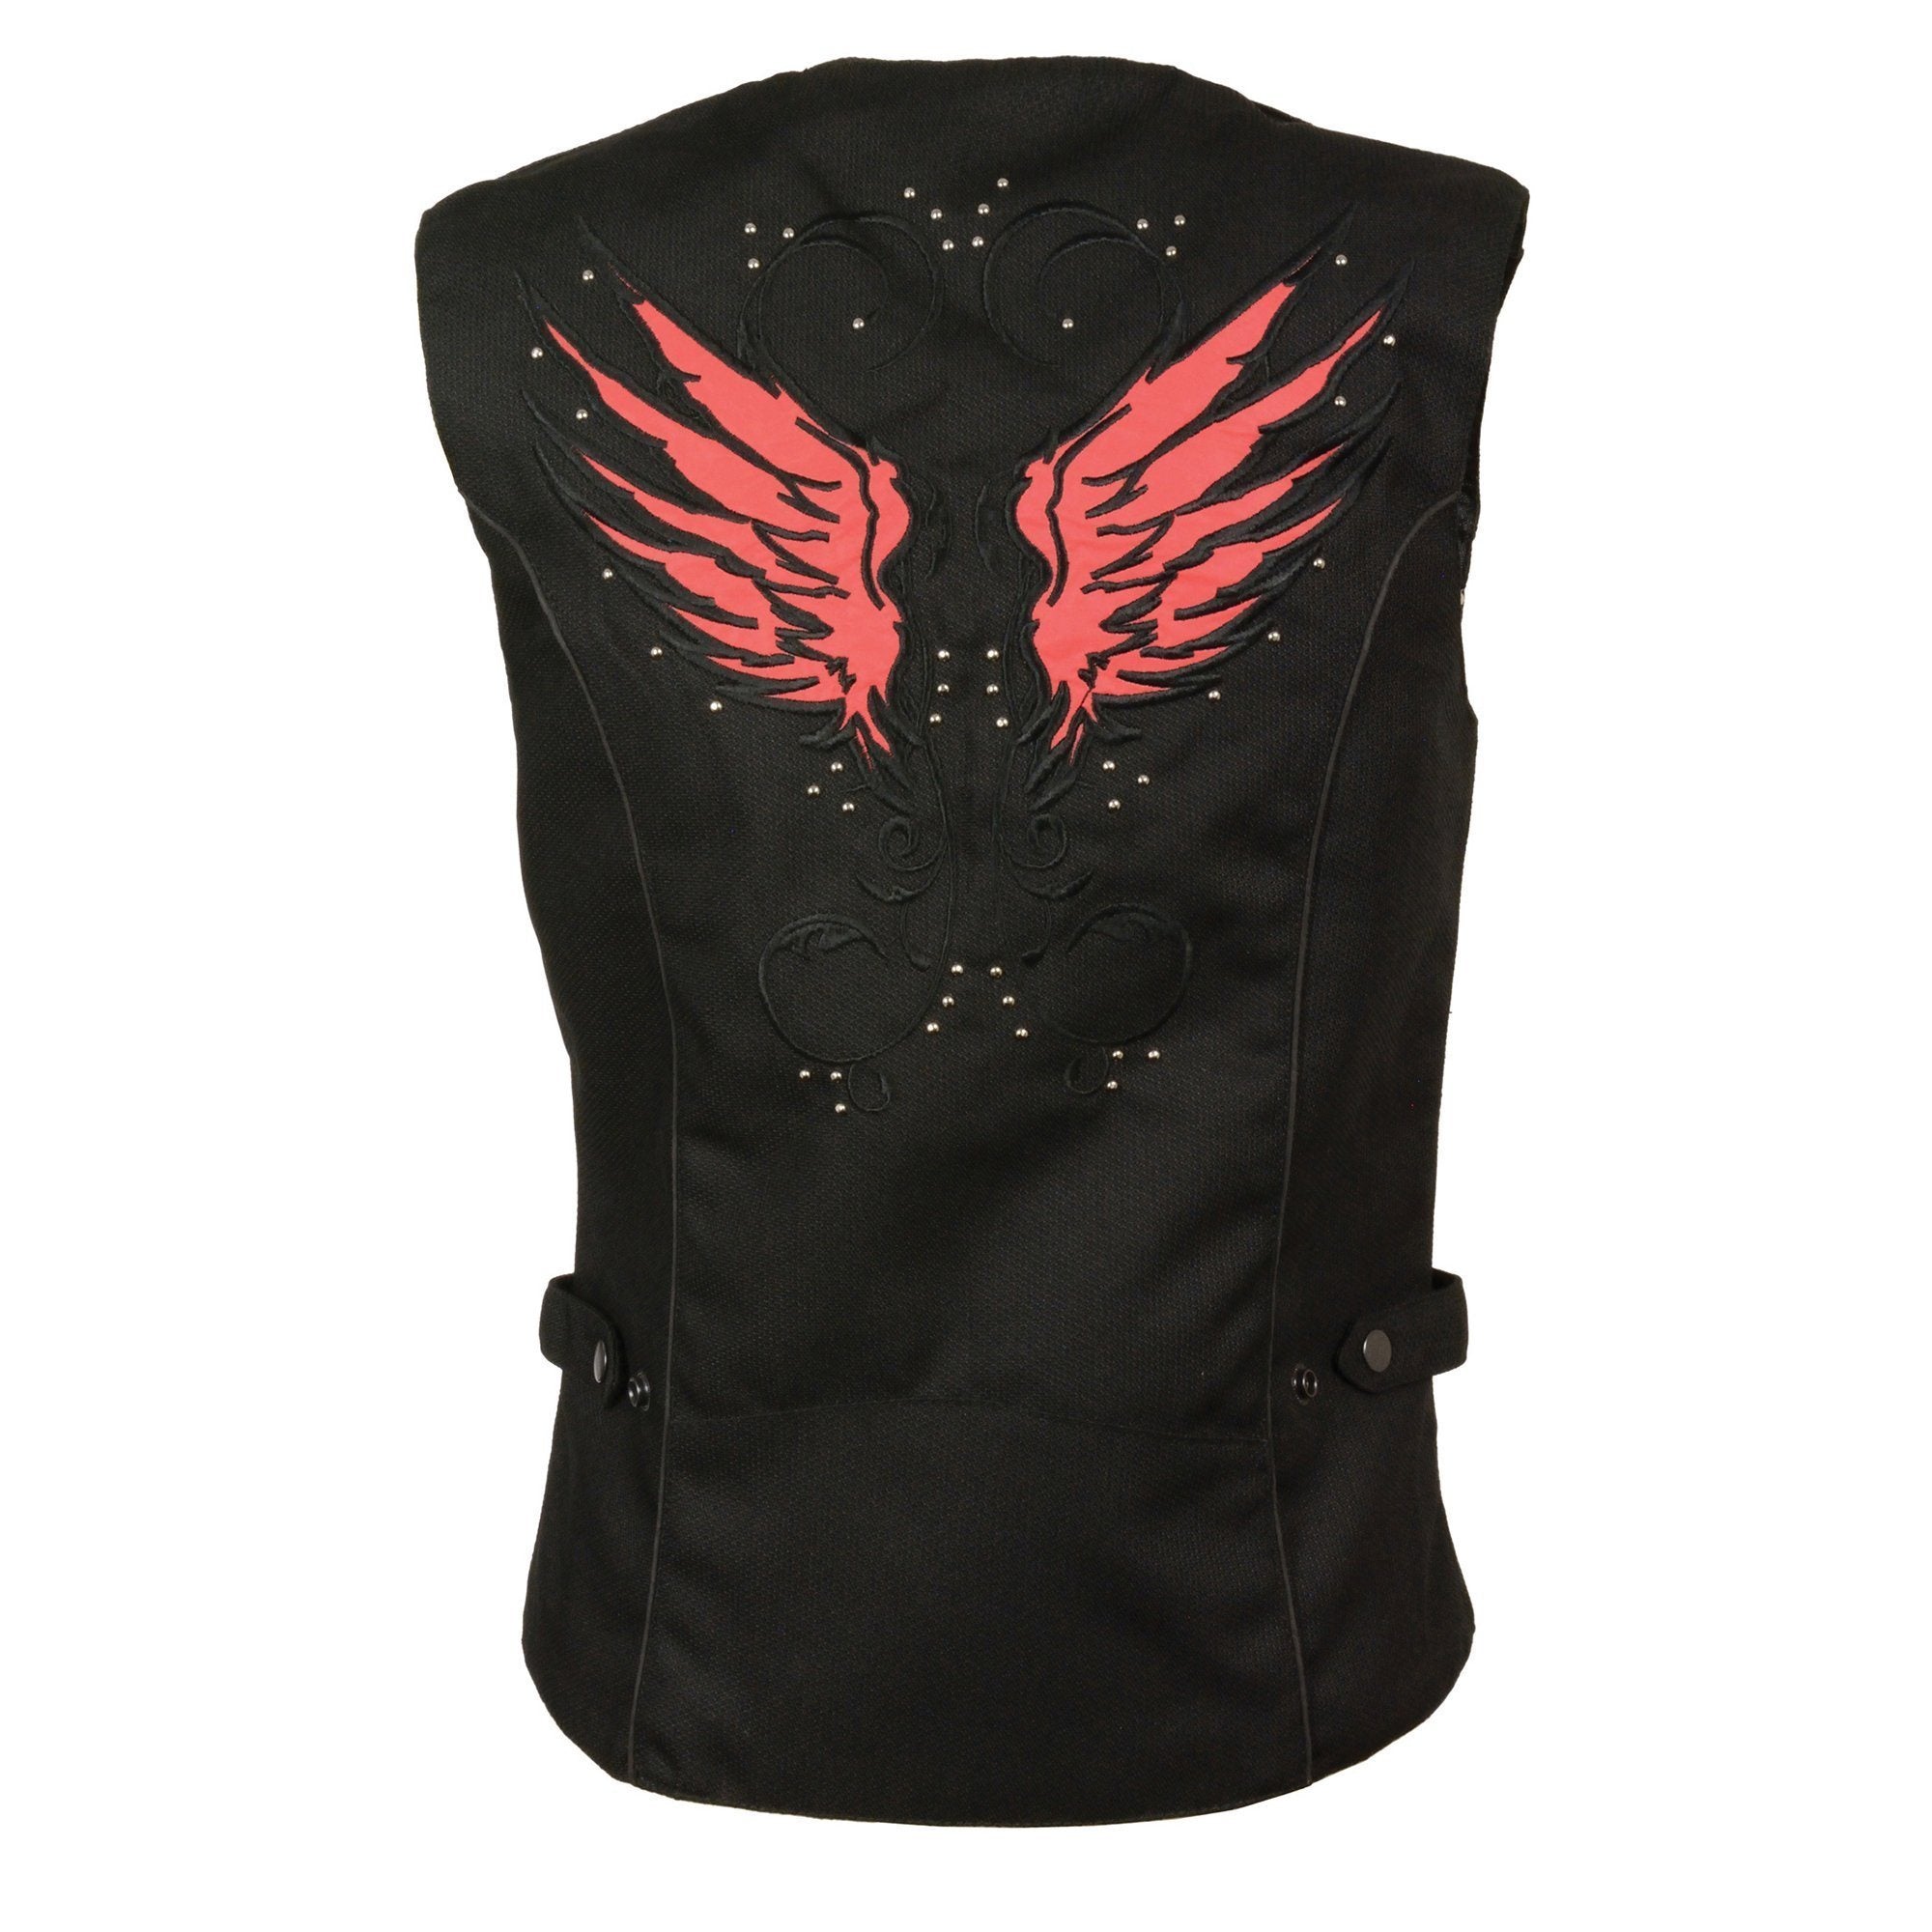 Milwaukee Performance SH1955 Ladies Black and Red Textile Vest with Wing Embroidery - Milwaukee Performance Womens Textile Vests